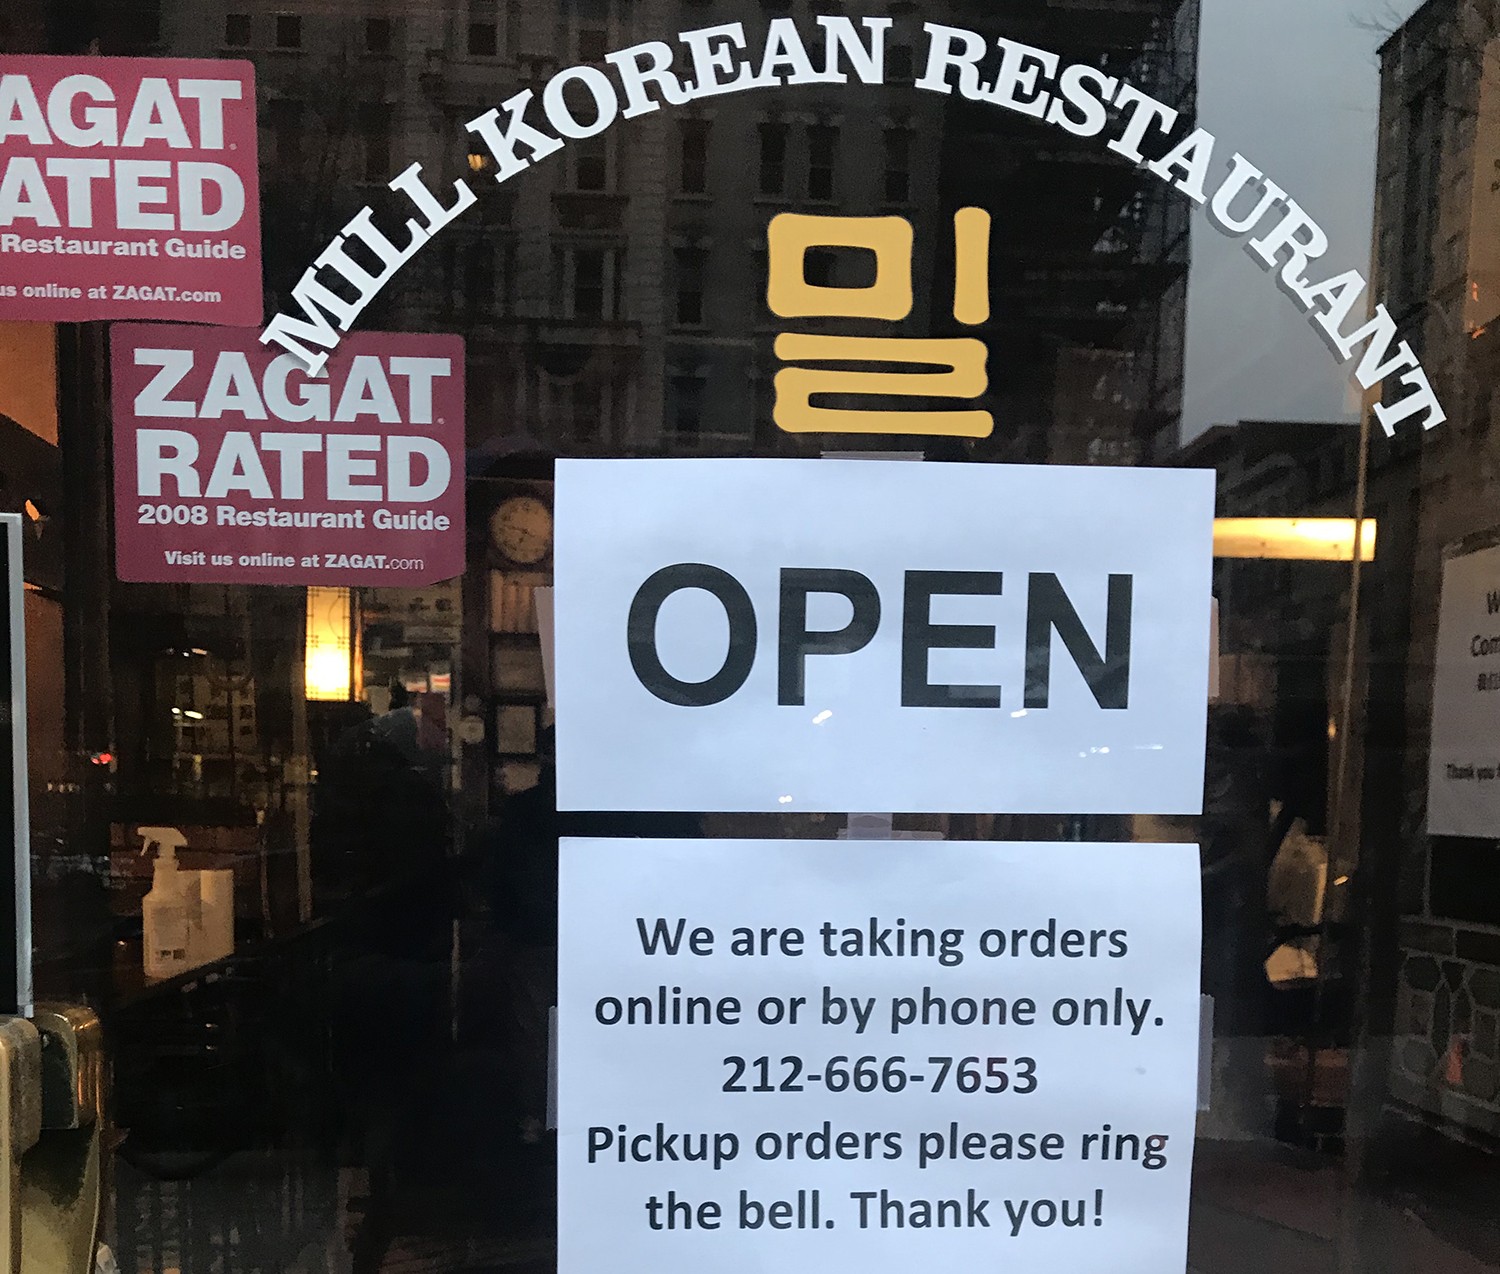 A sign stating that Mill Korean Restaurant is open for pickup and delivery orders.